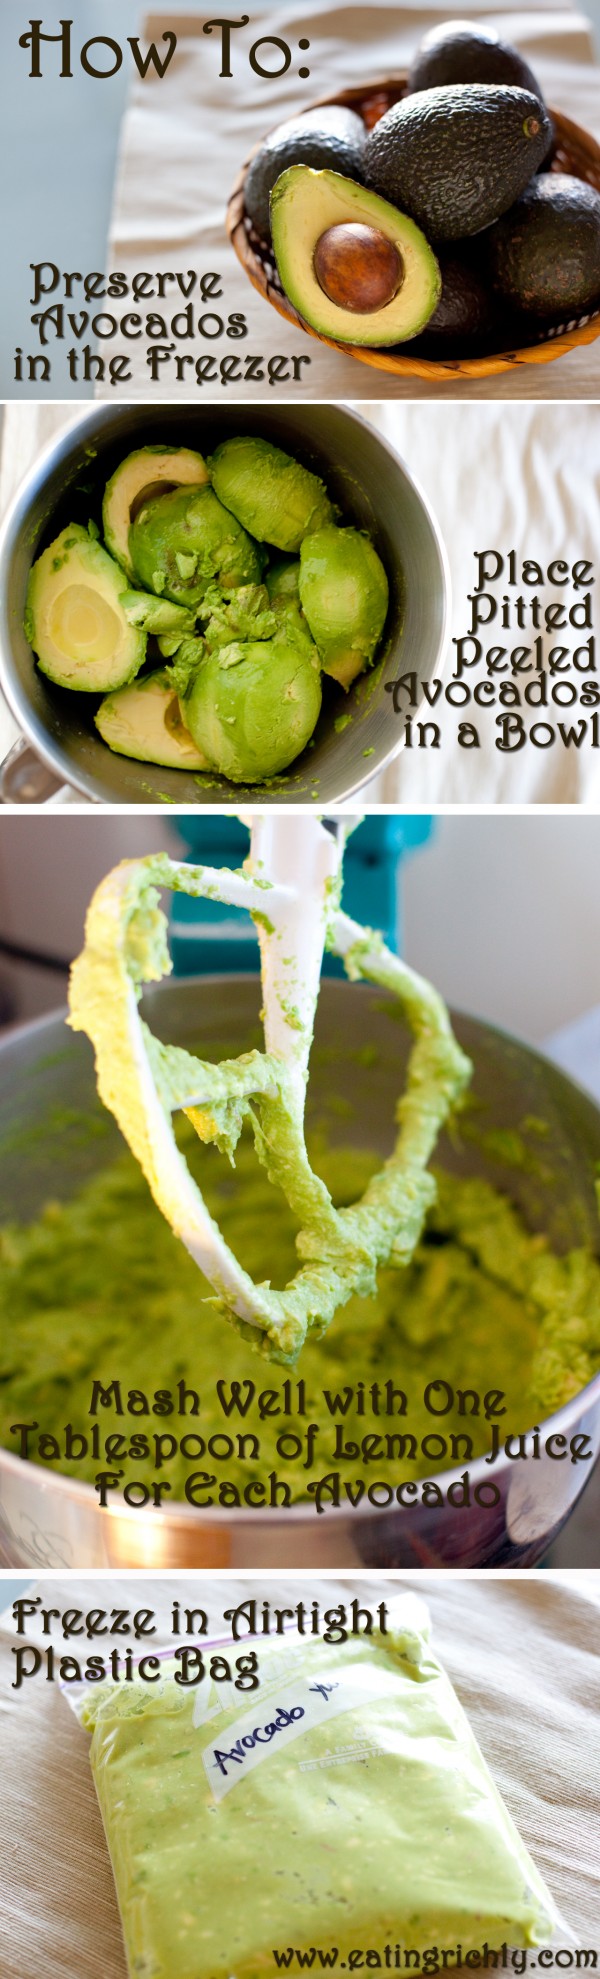 How to preserve avocados in the freezer from EatingRichly.com